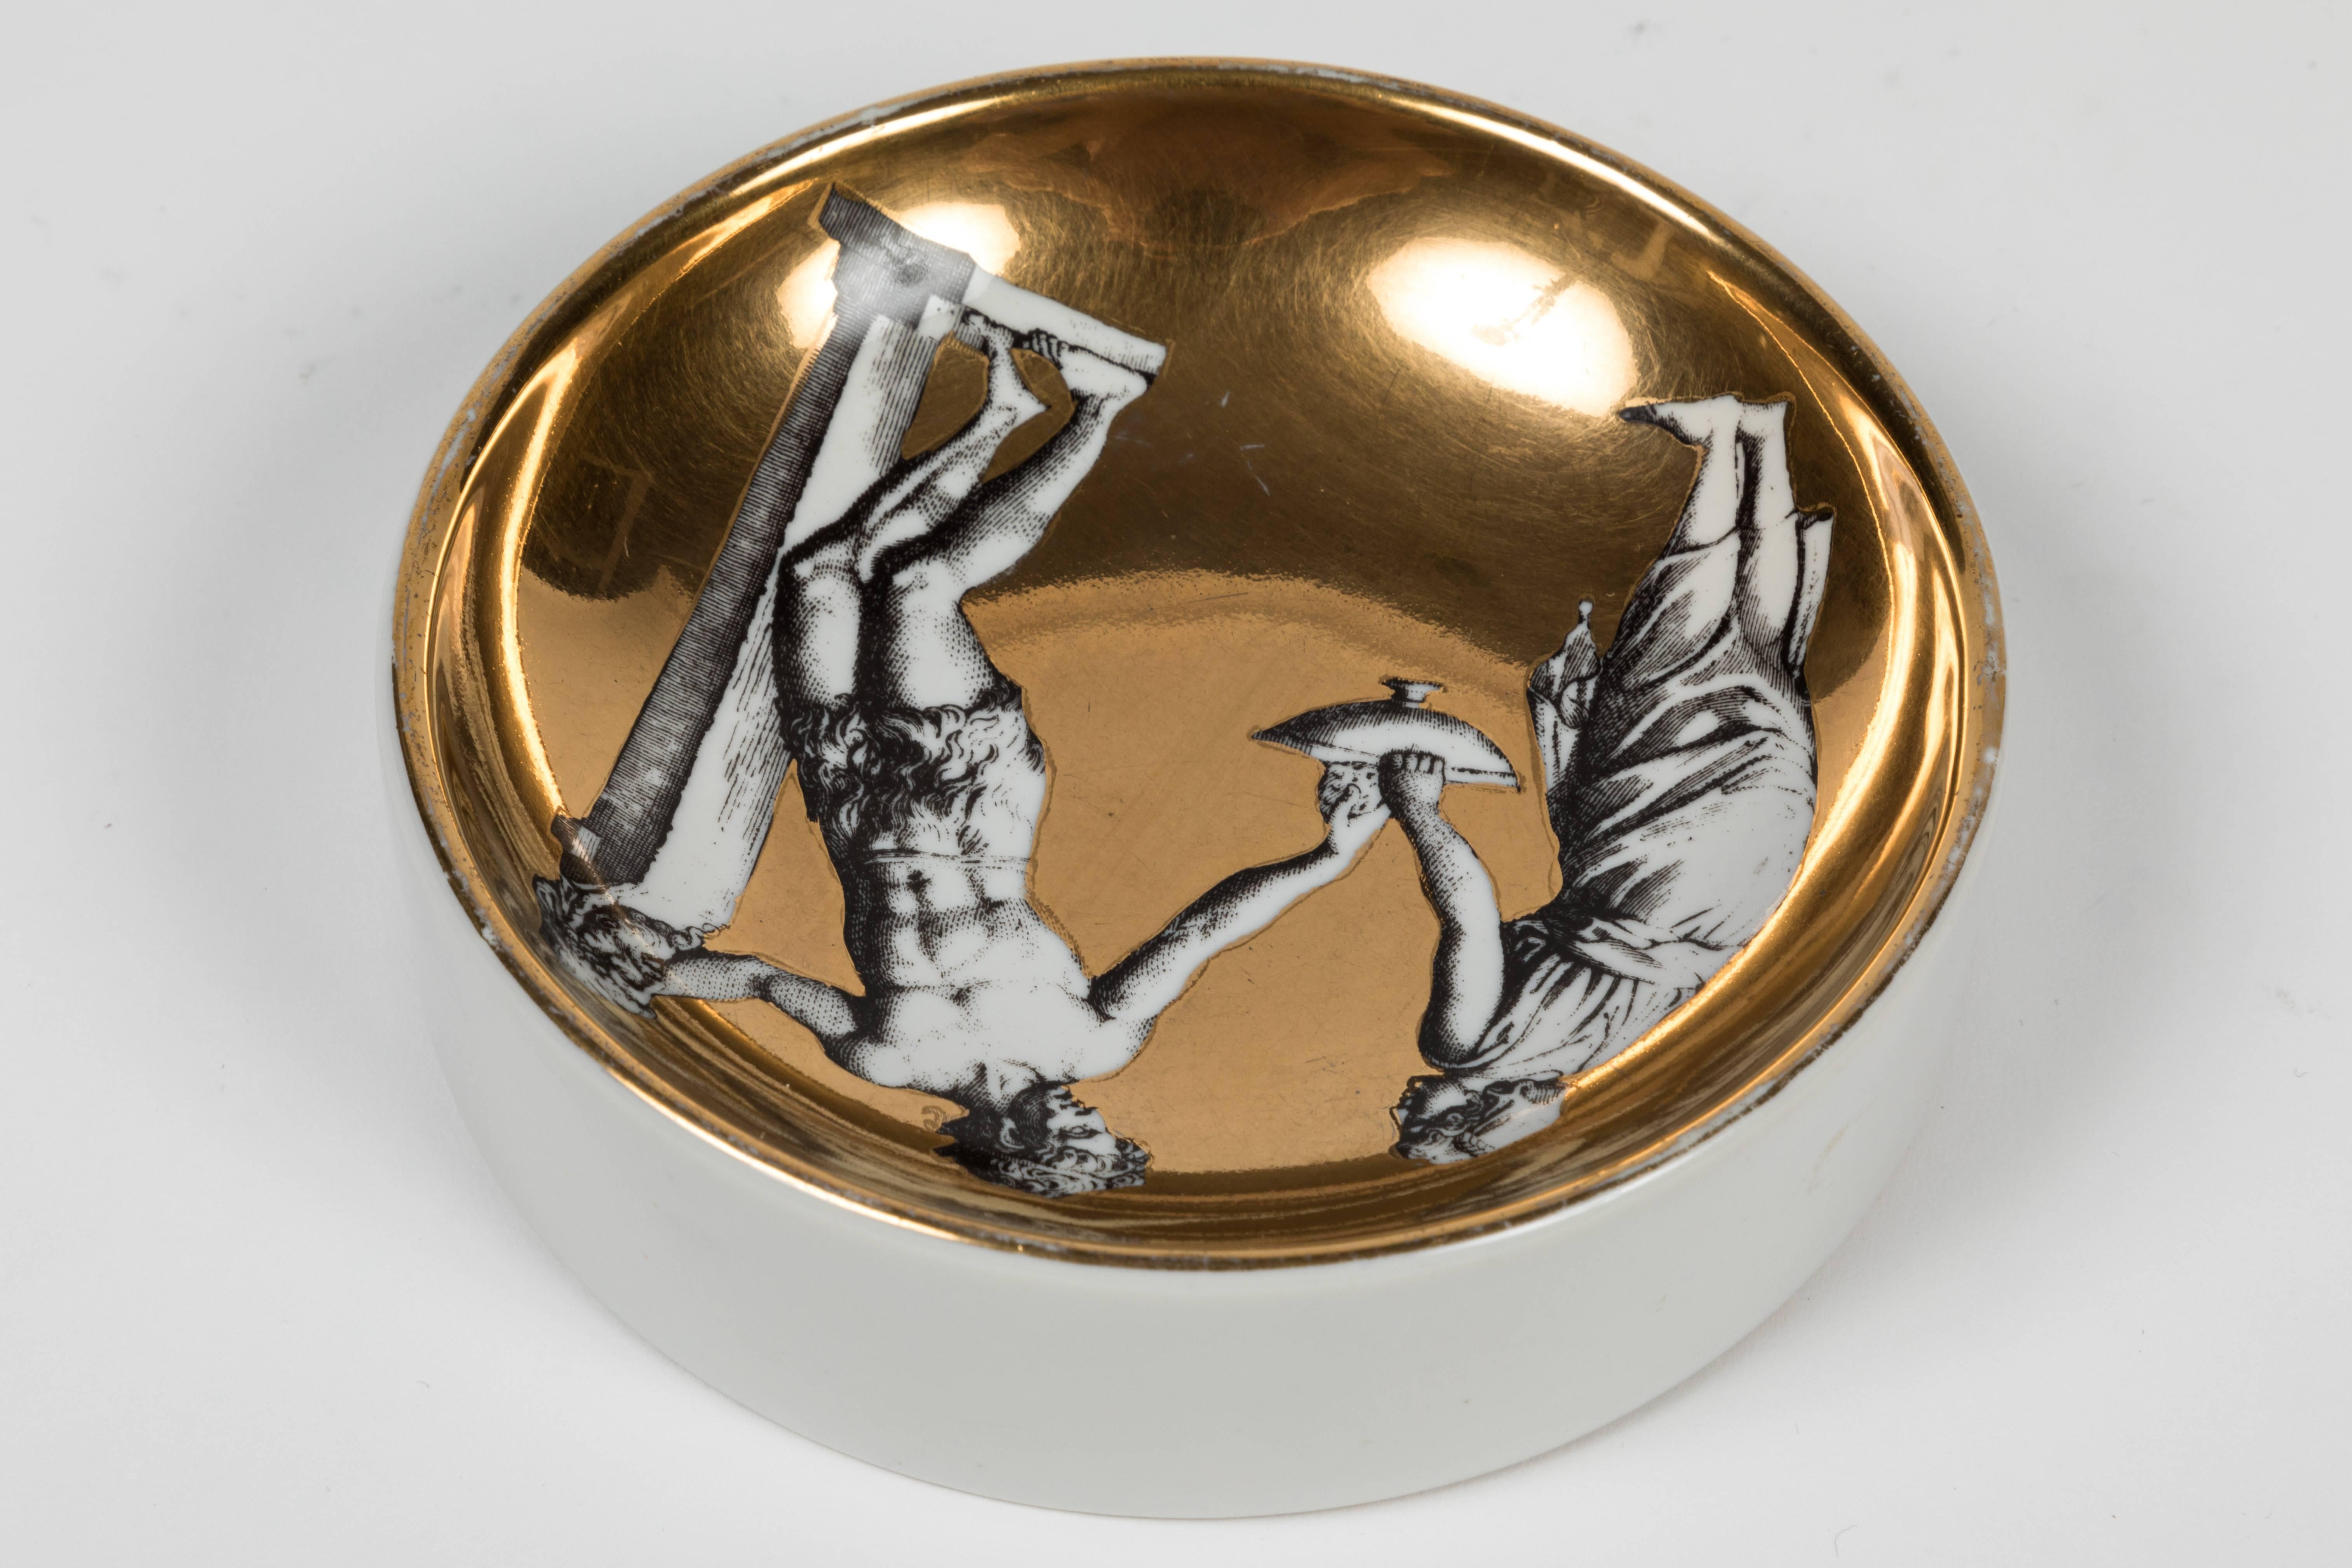 Classical Roman Porcelain Dish Depicting Roman Figures by Fornasetti